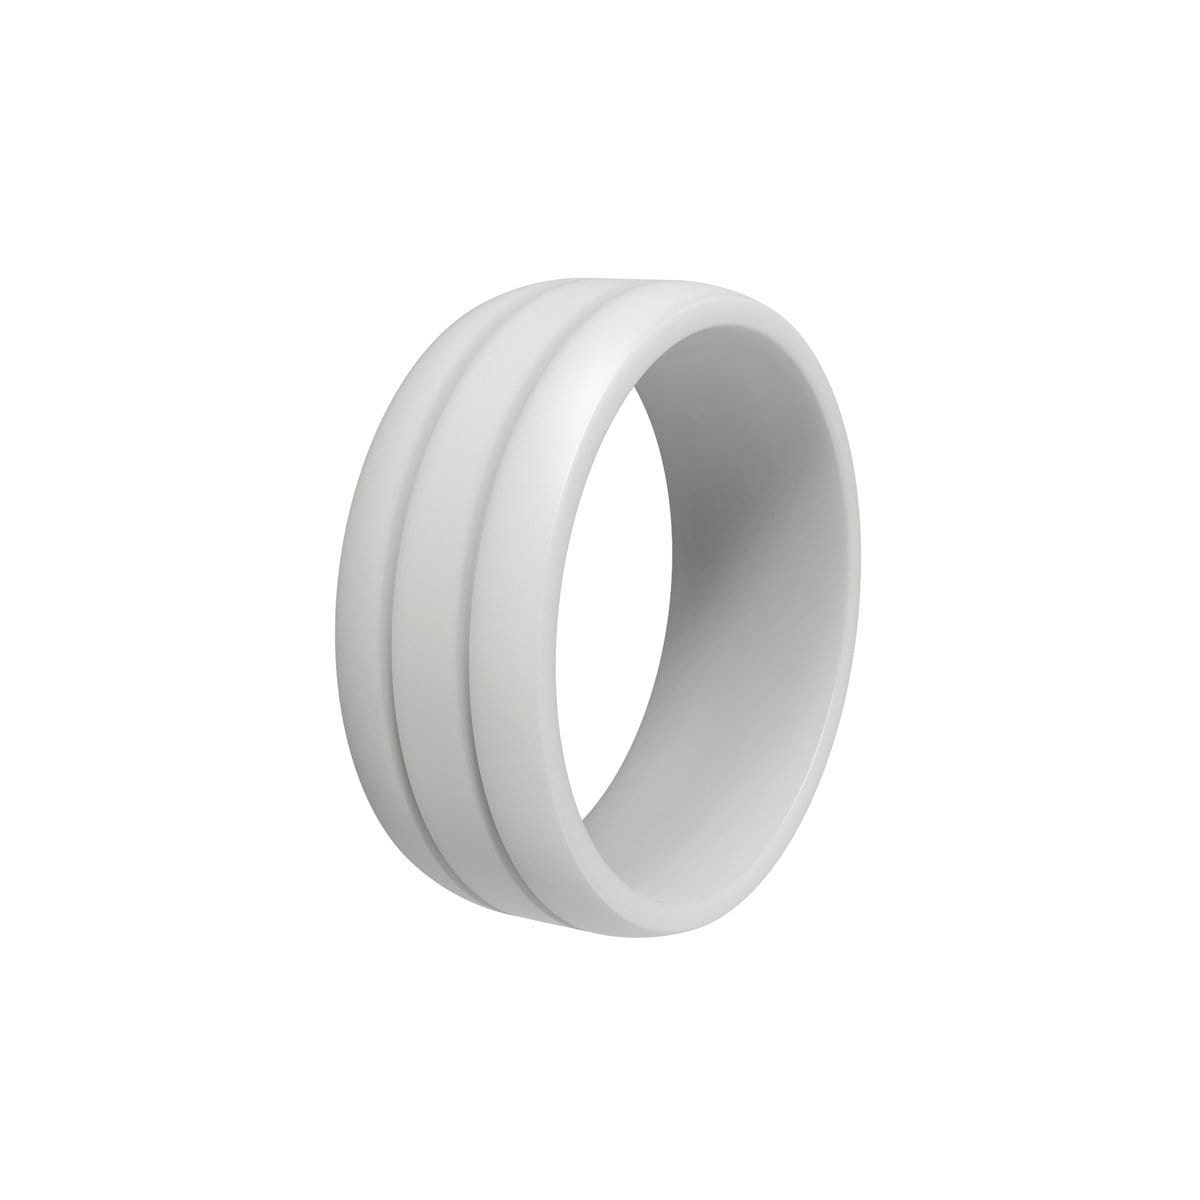 Women's Bevel Silicone Rings – CheapSiliconeRings